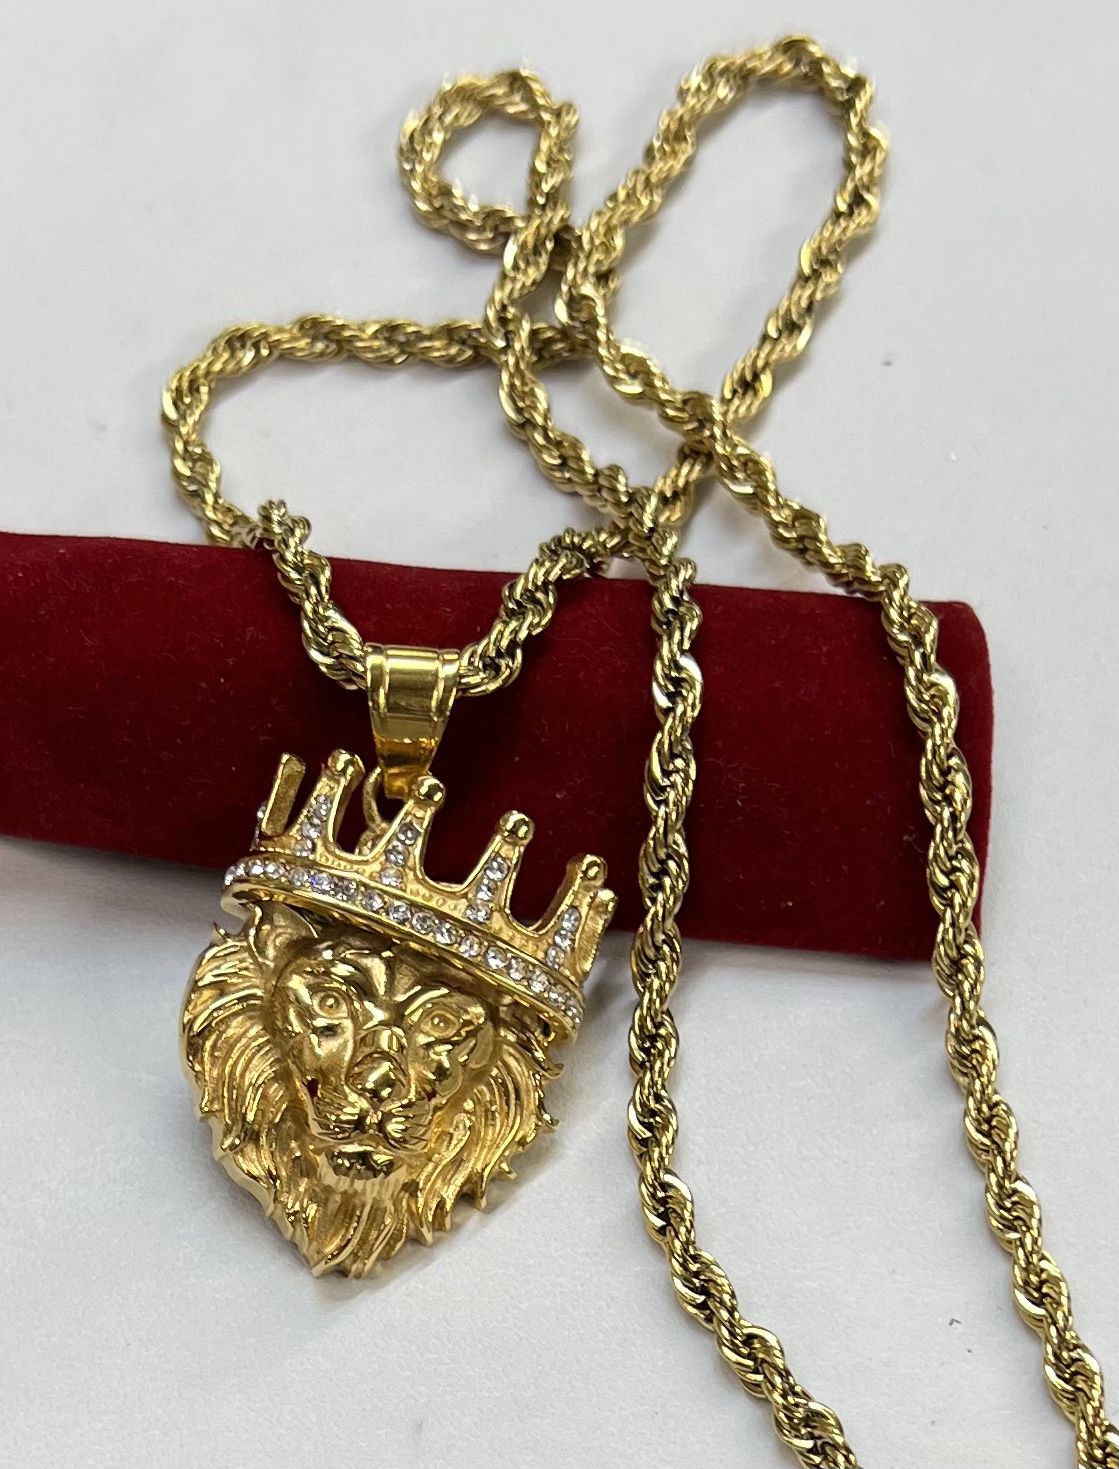 Lion Head Pendant And  High Polished Rope Please Necklace 